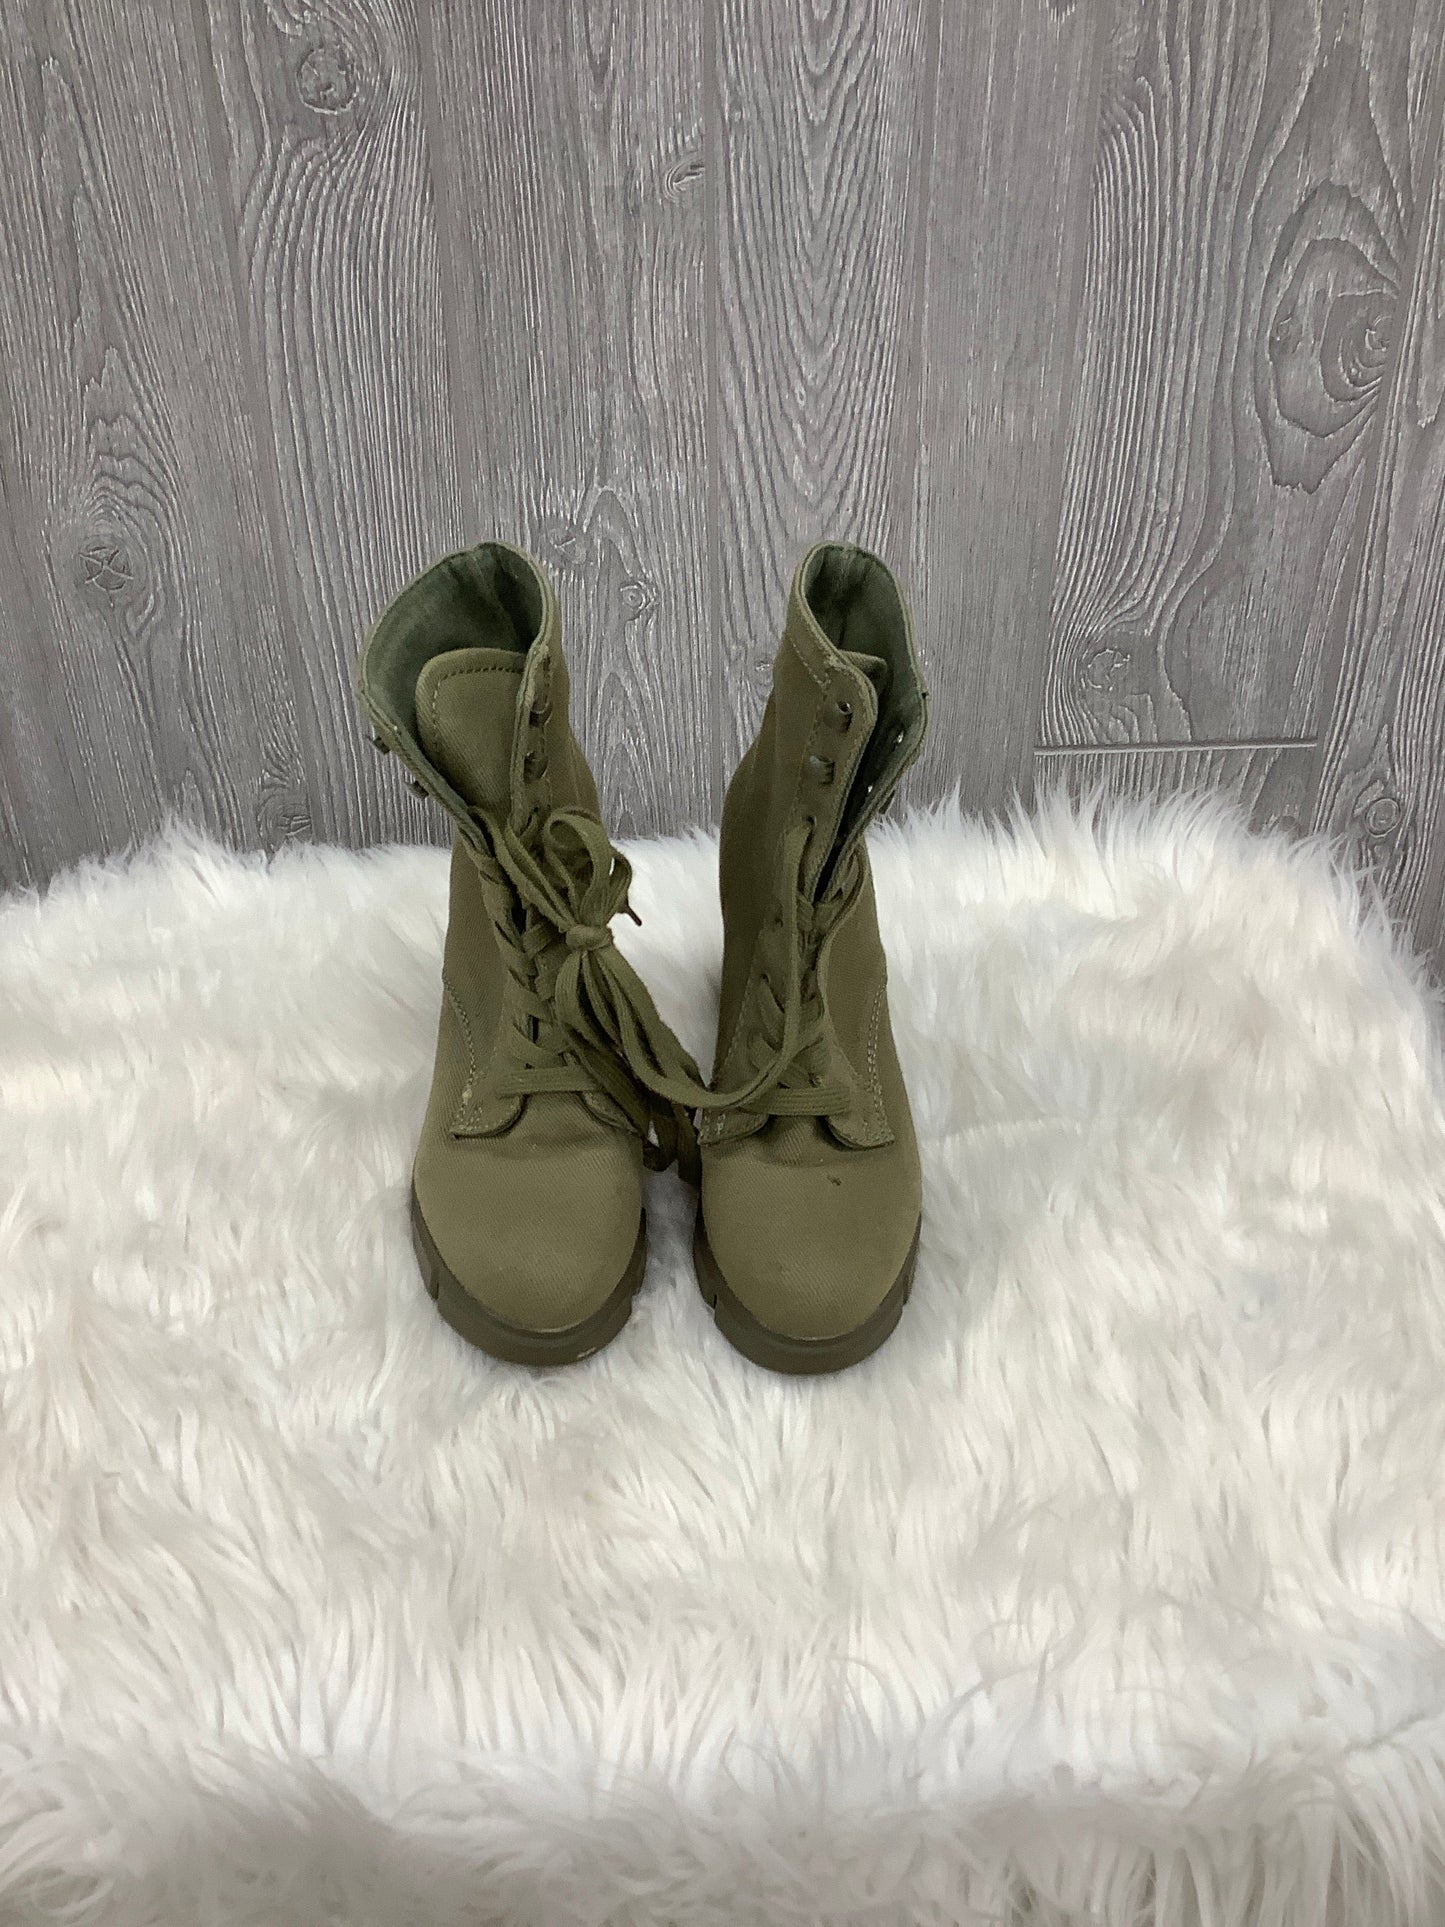 Boots Ankle Heels By Esprit  Size: 7.5